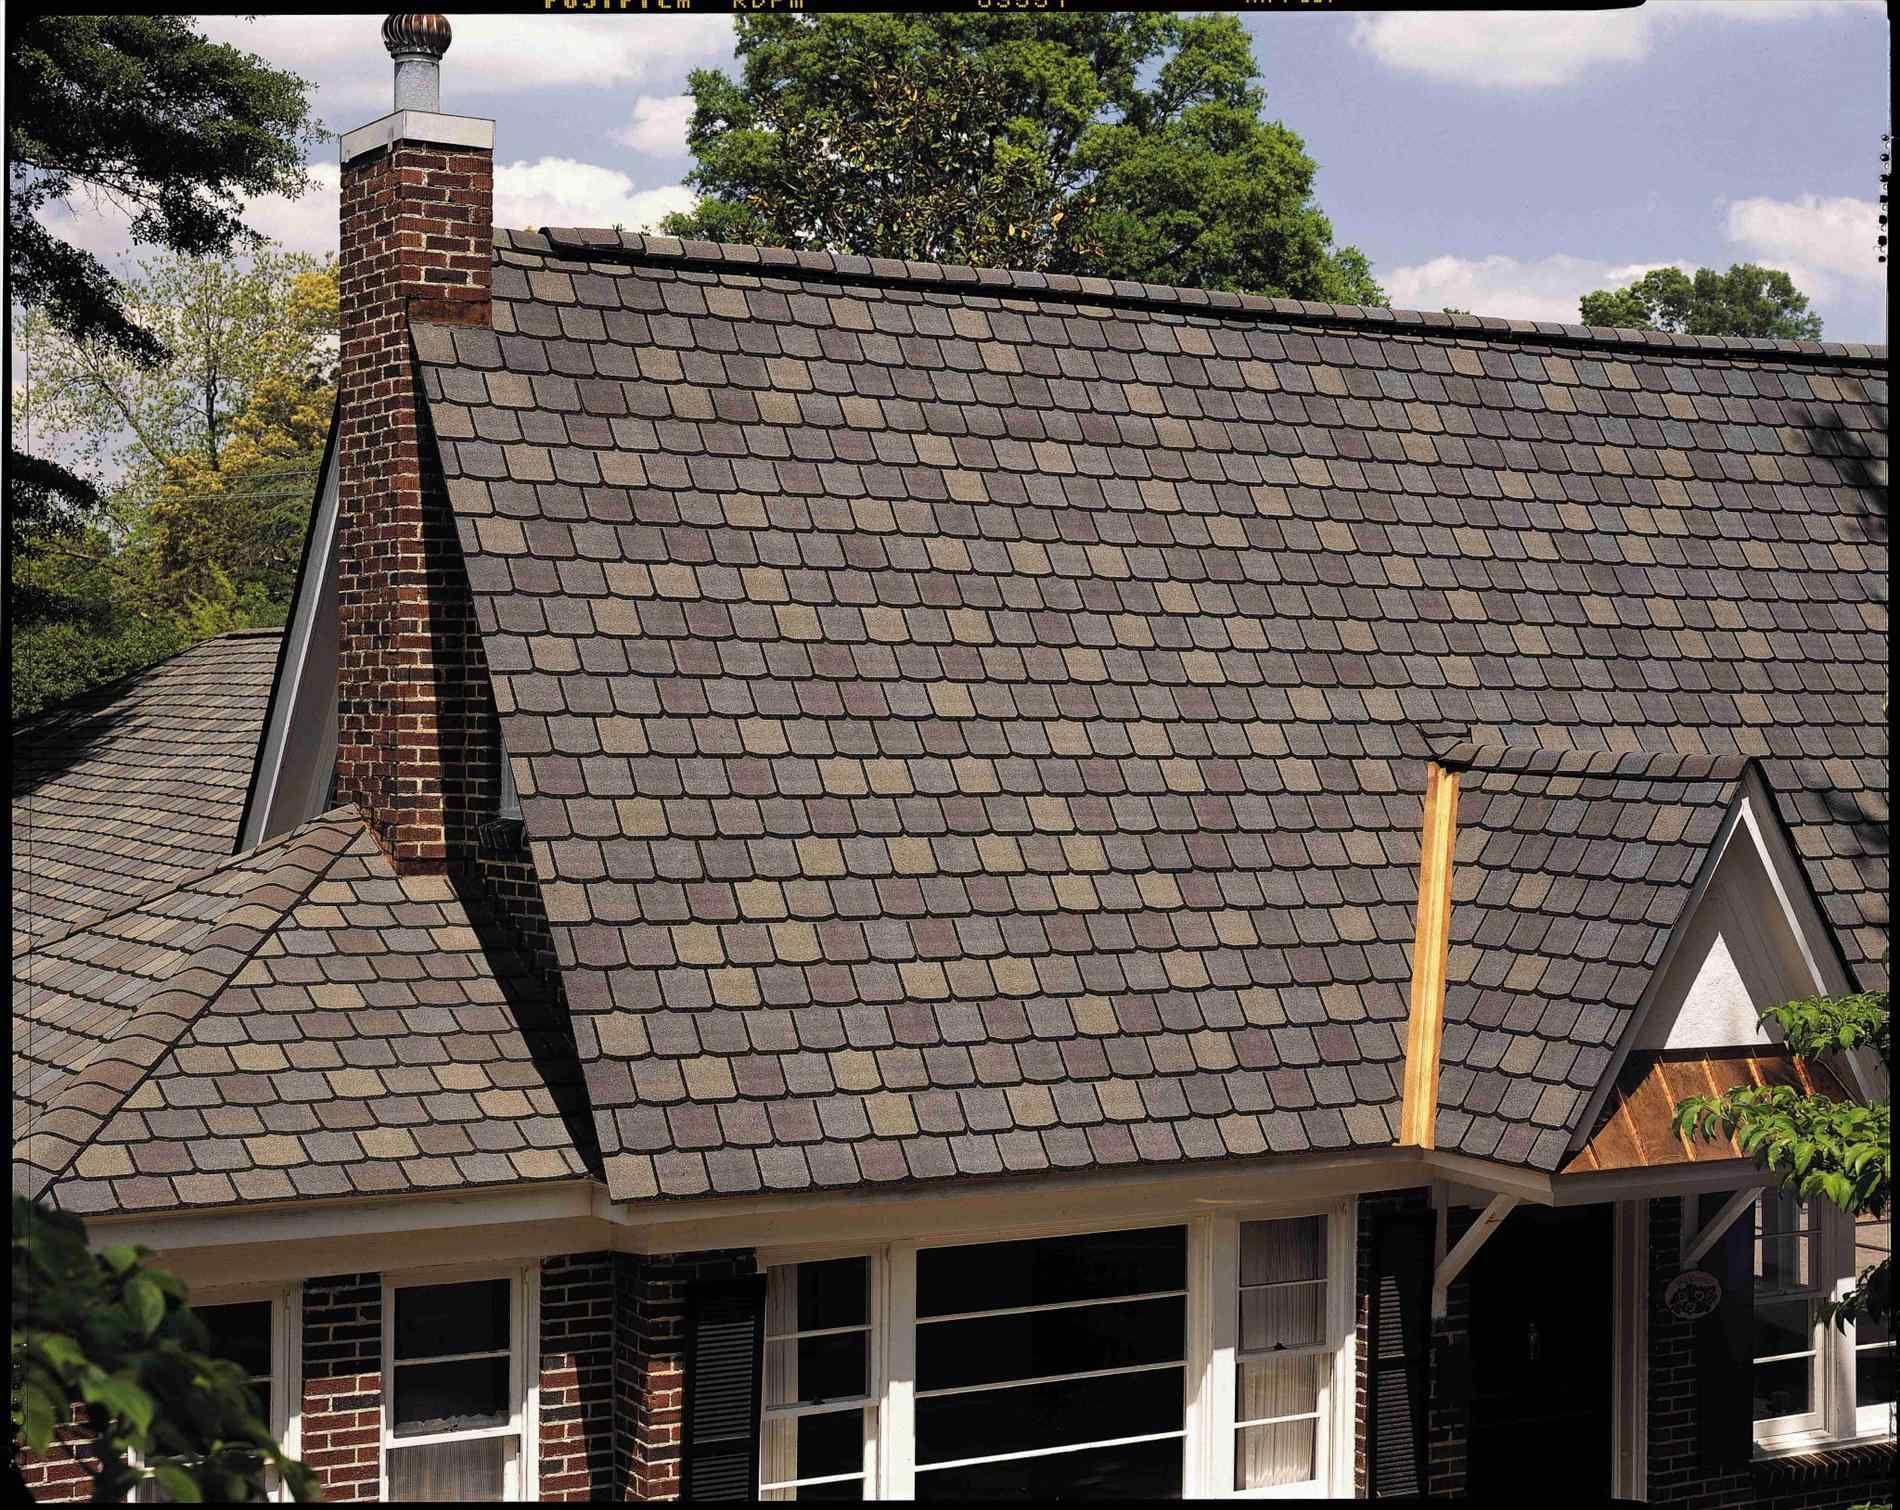 Repair or Replace? How to Determine What Your Roof Needs